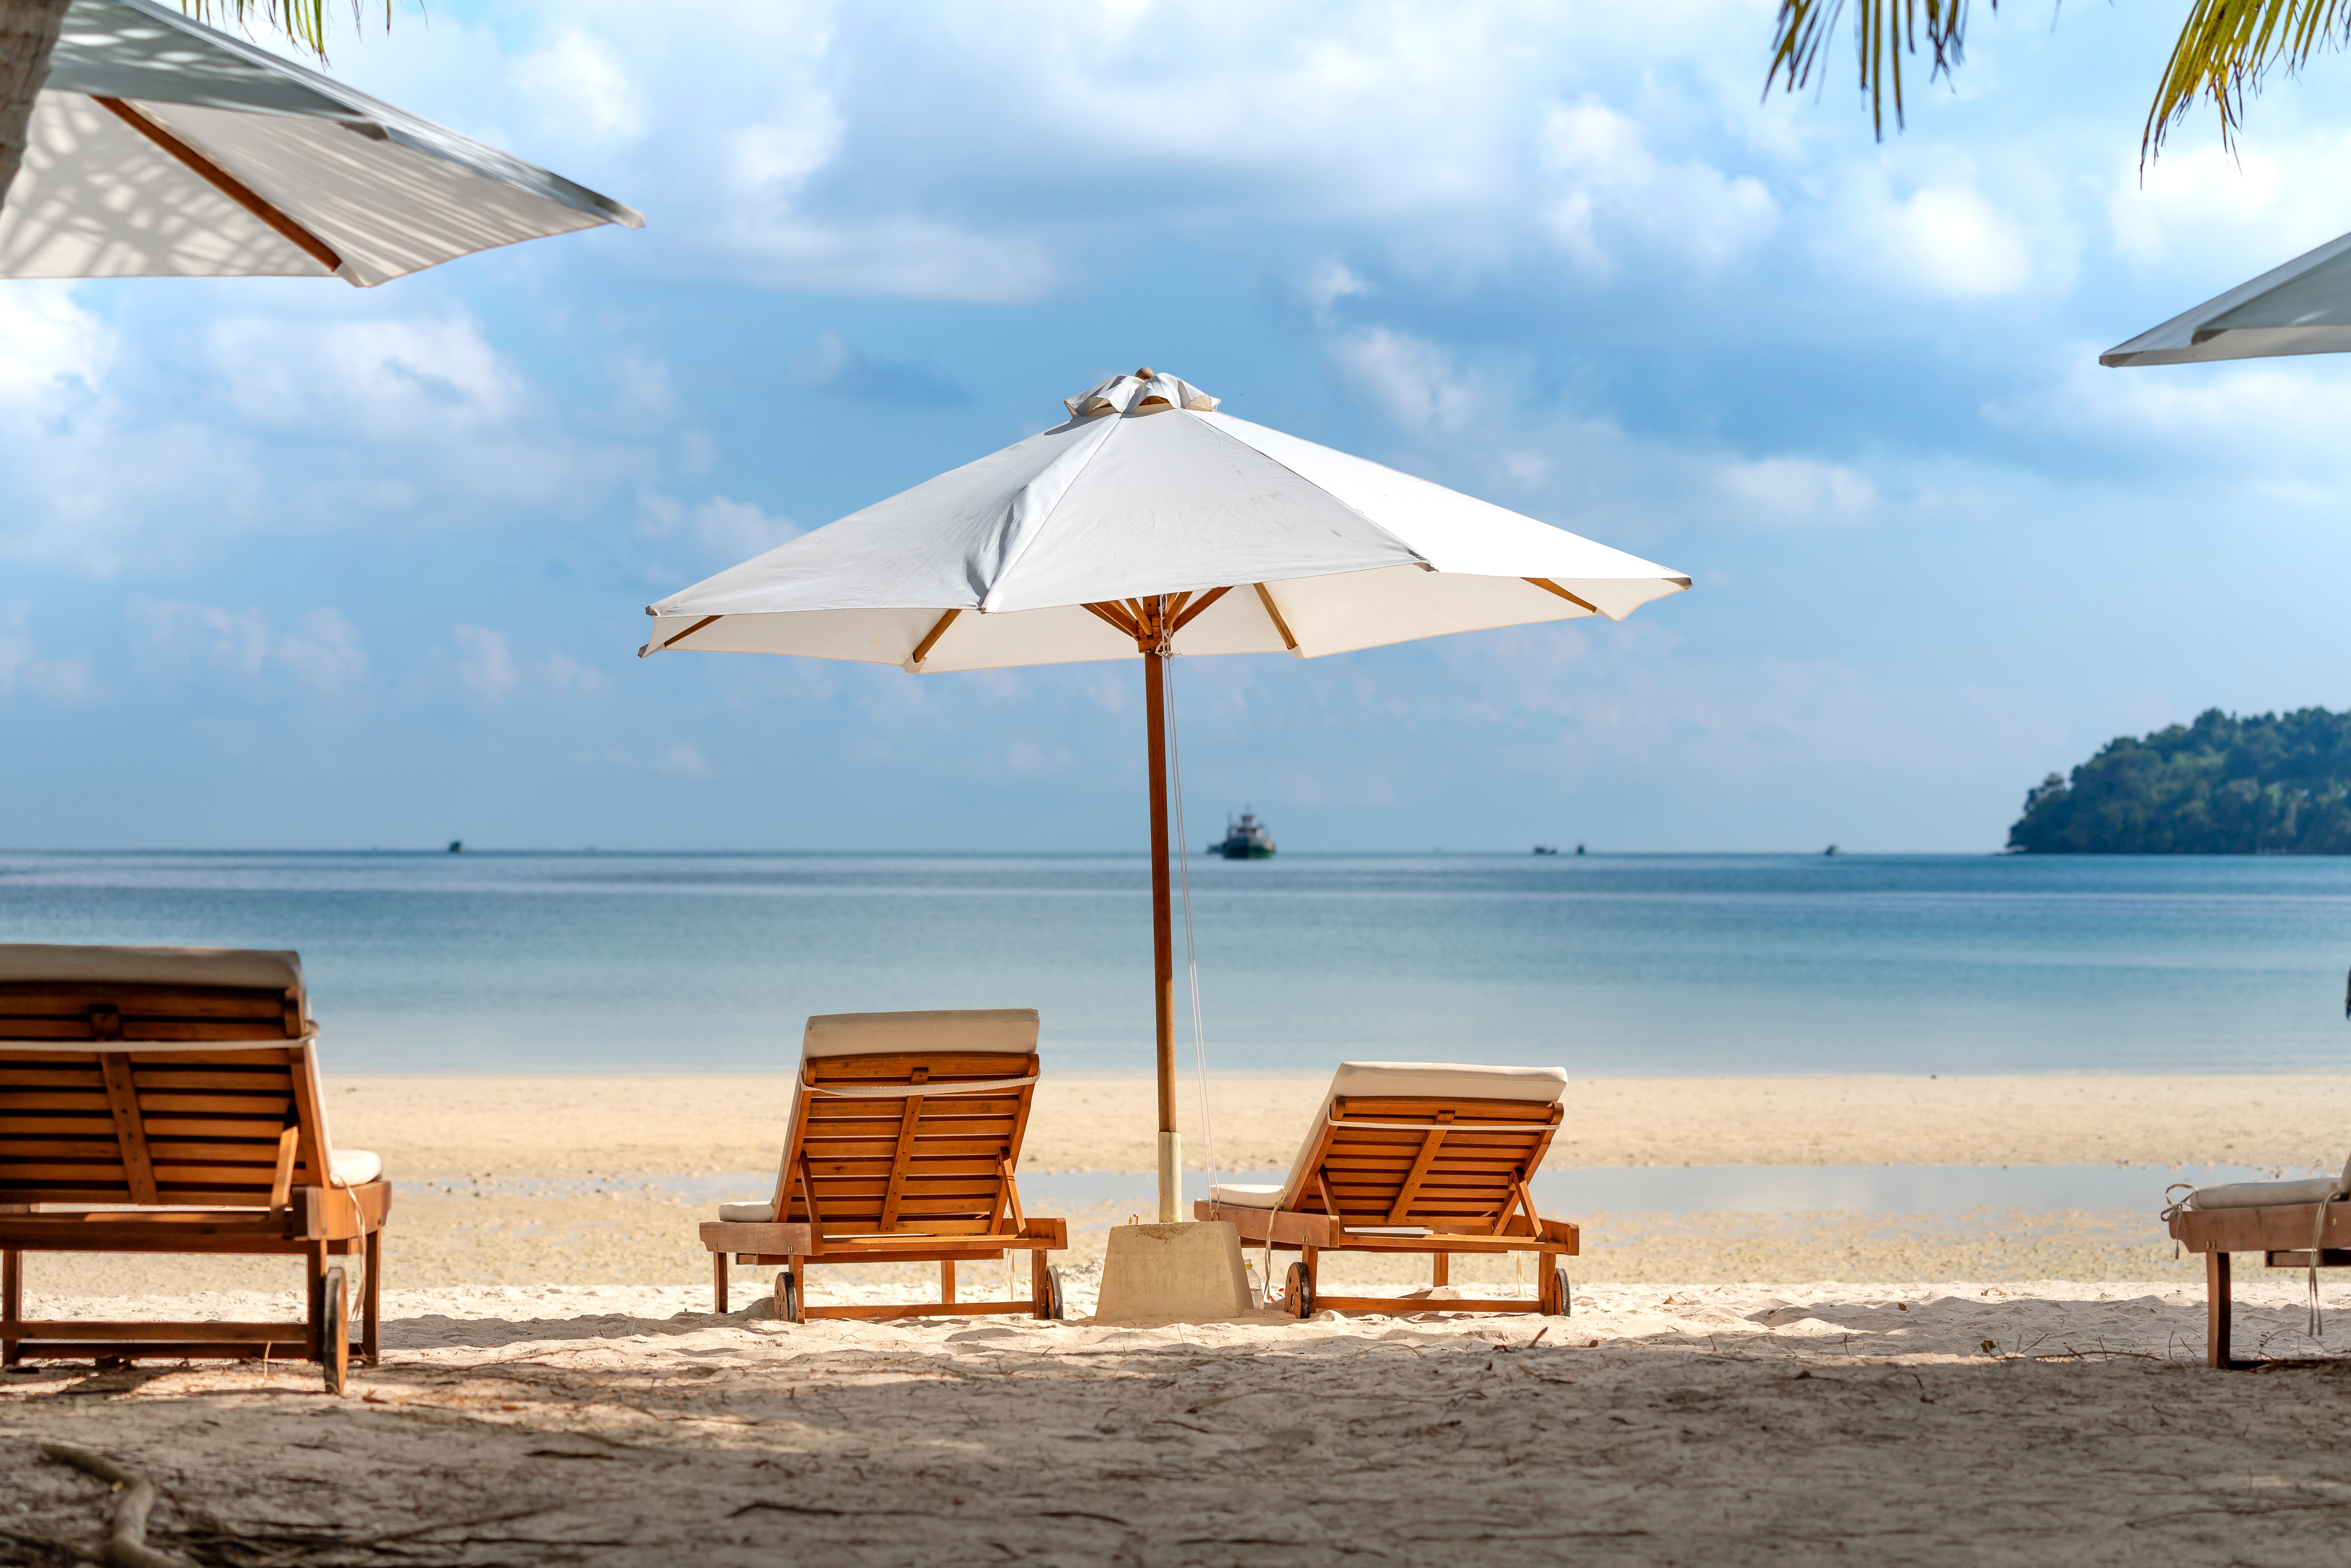 Two chairs and umbrella on the beach during a sunny day